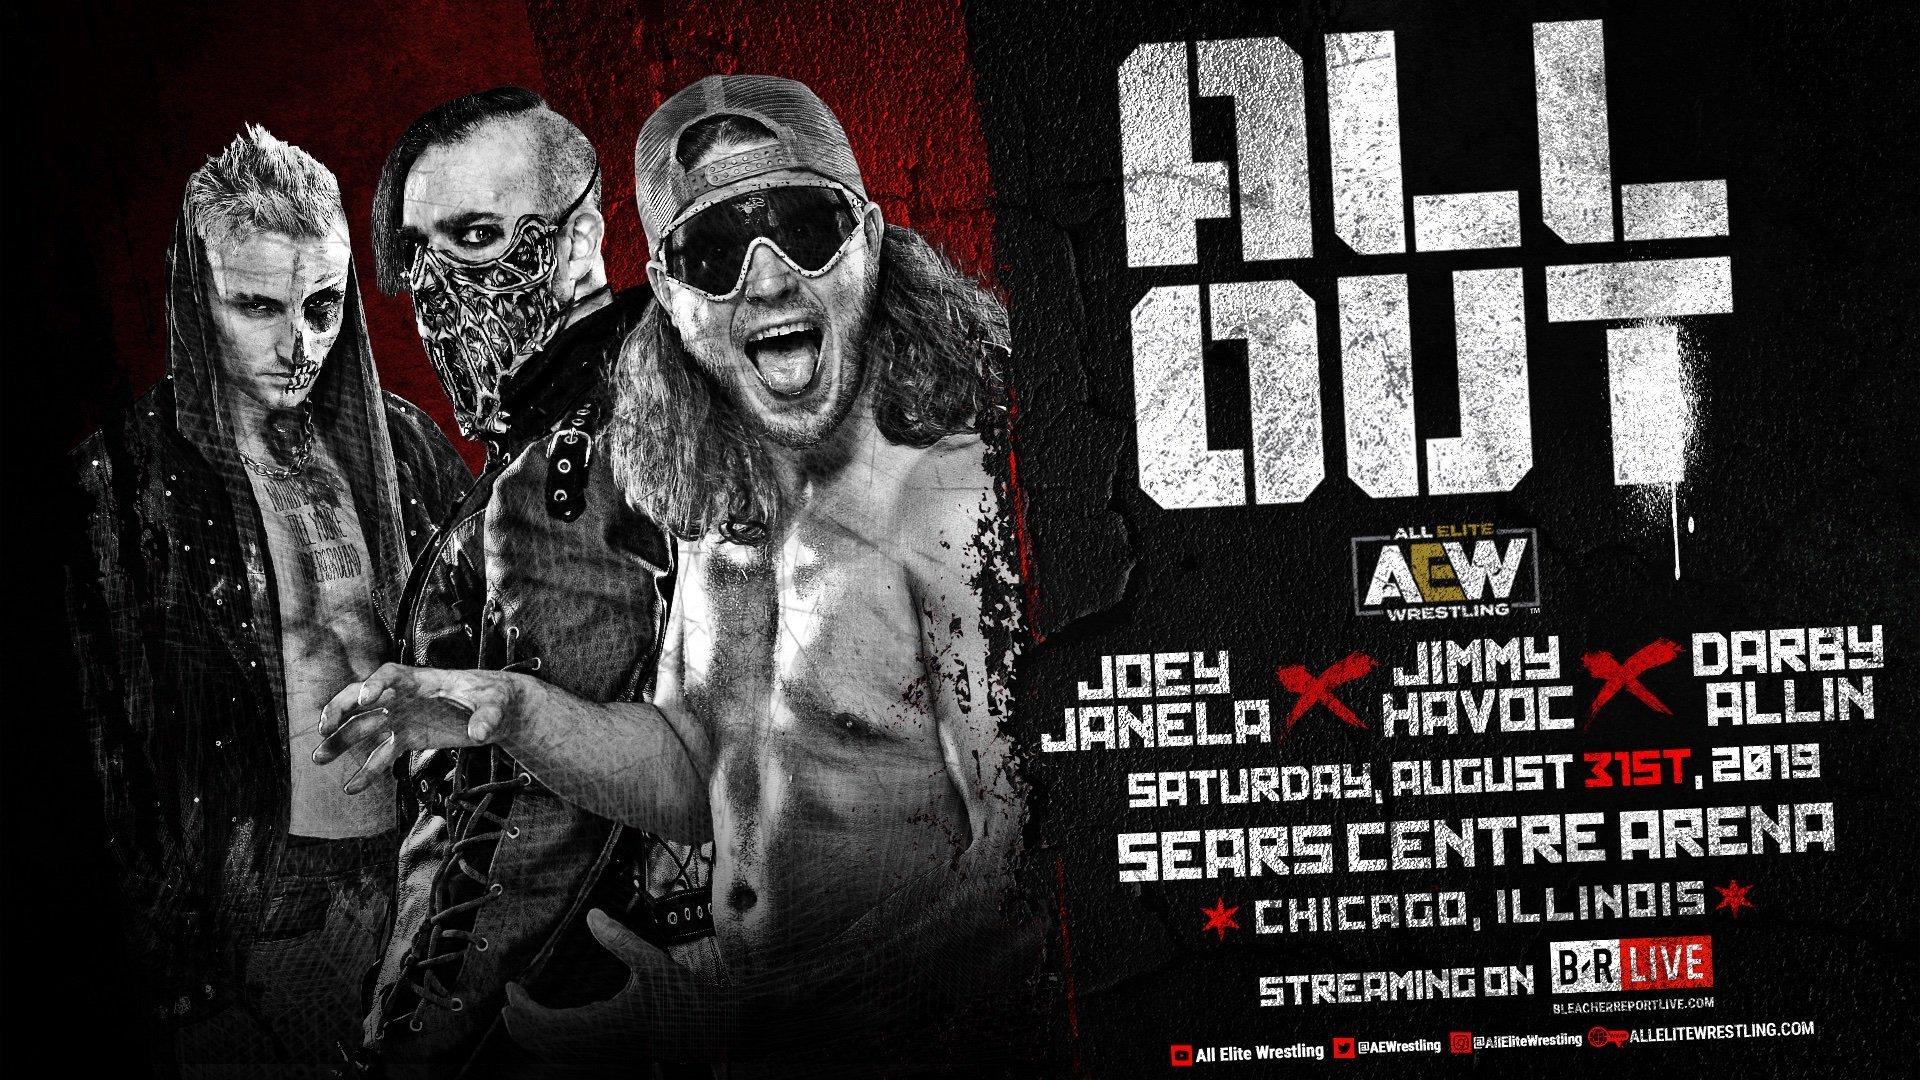 NEWS: Three Way Match Announced For AEW All Out